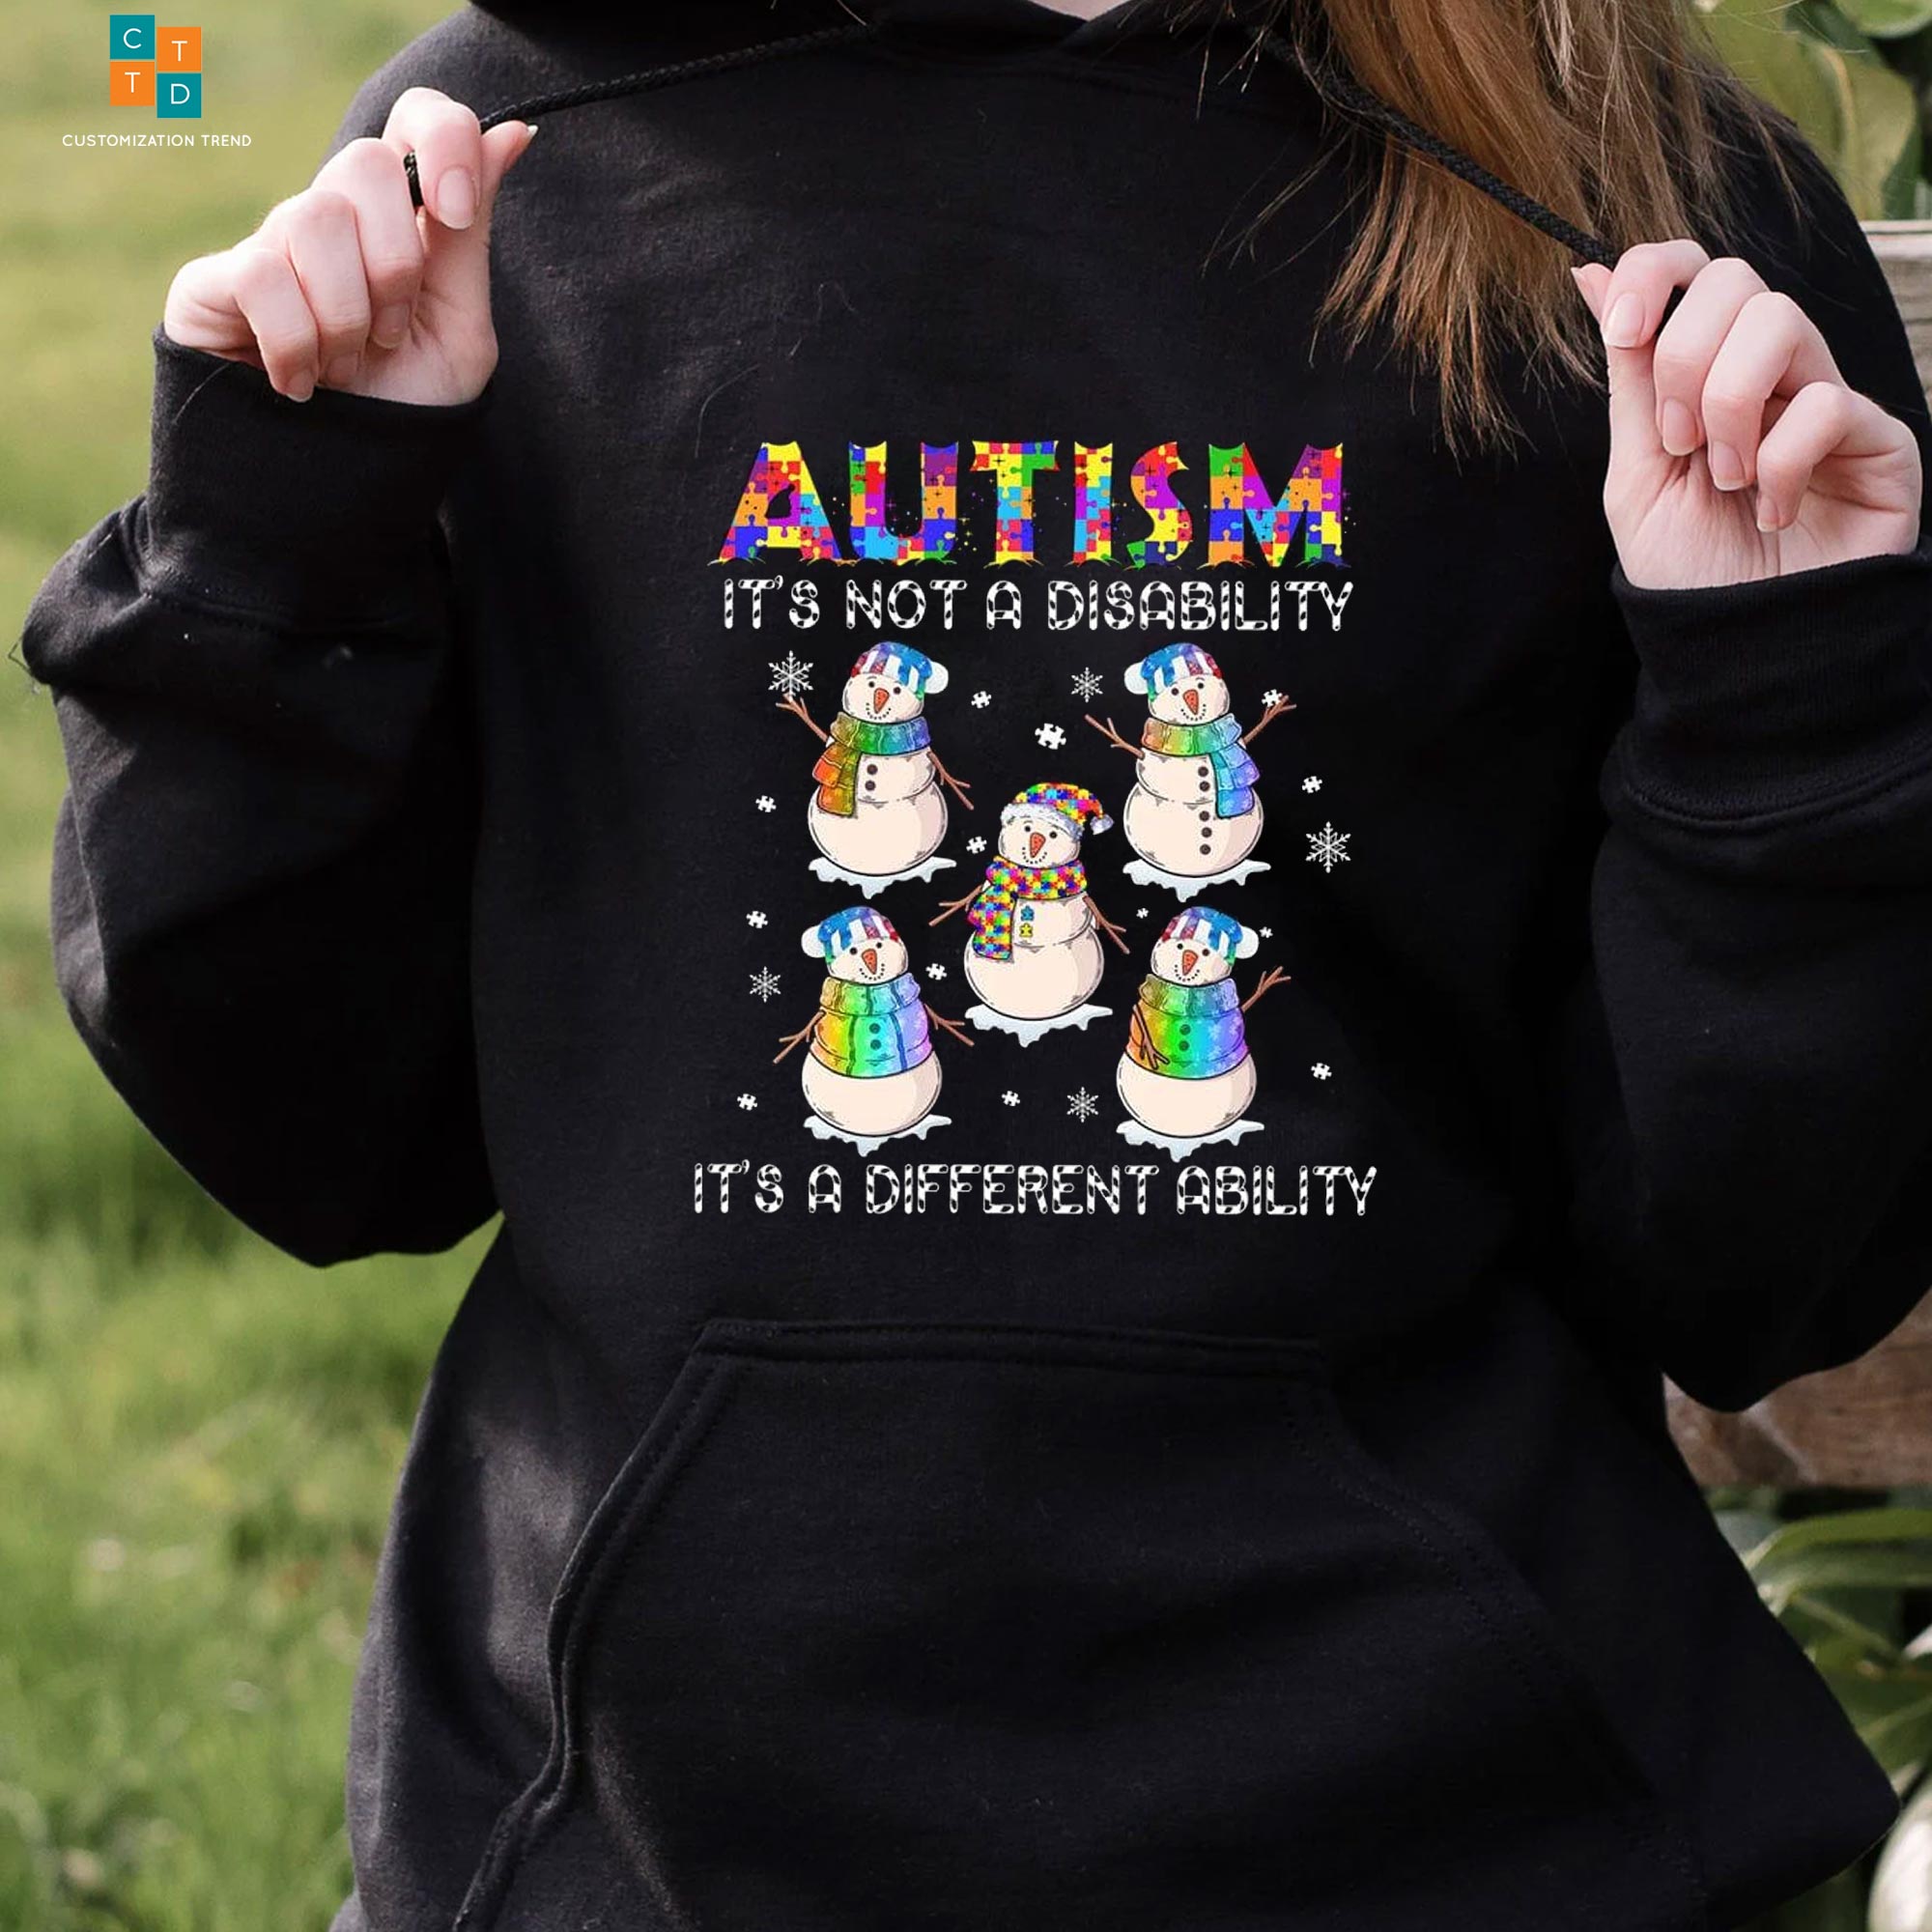 Autism It’s Not A Disability Hoodie, Shirt